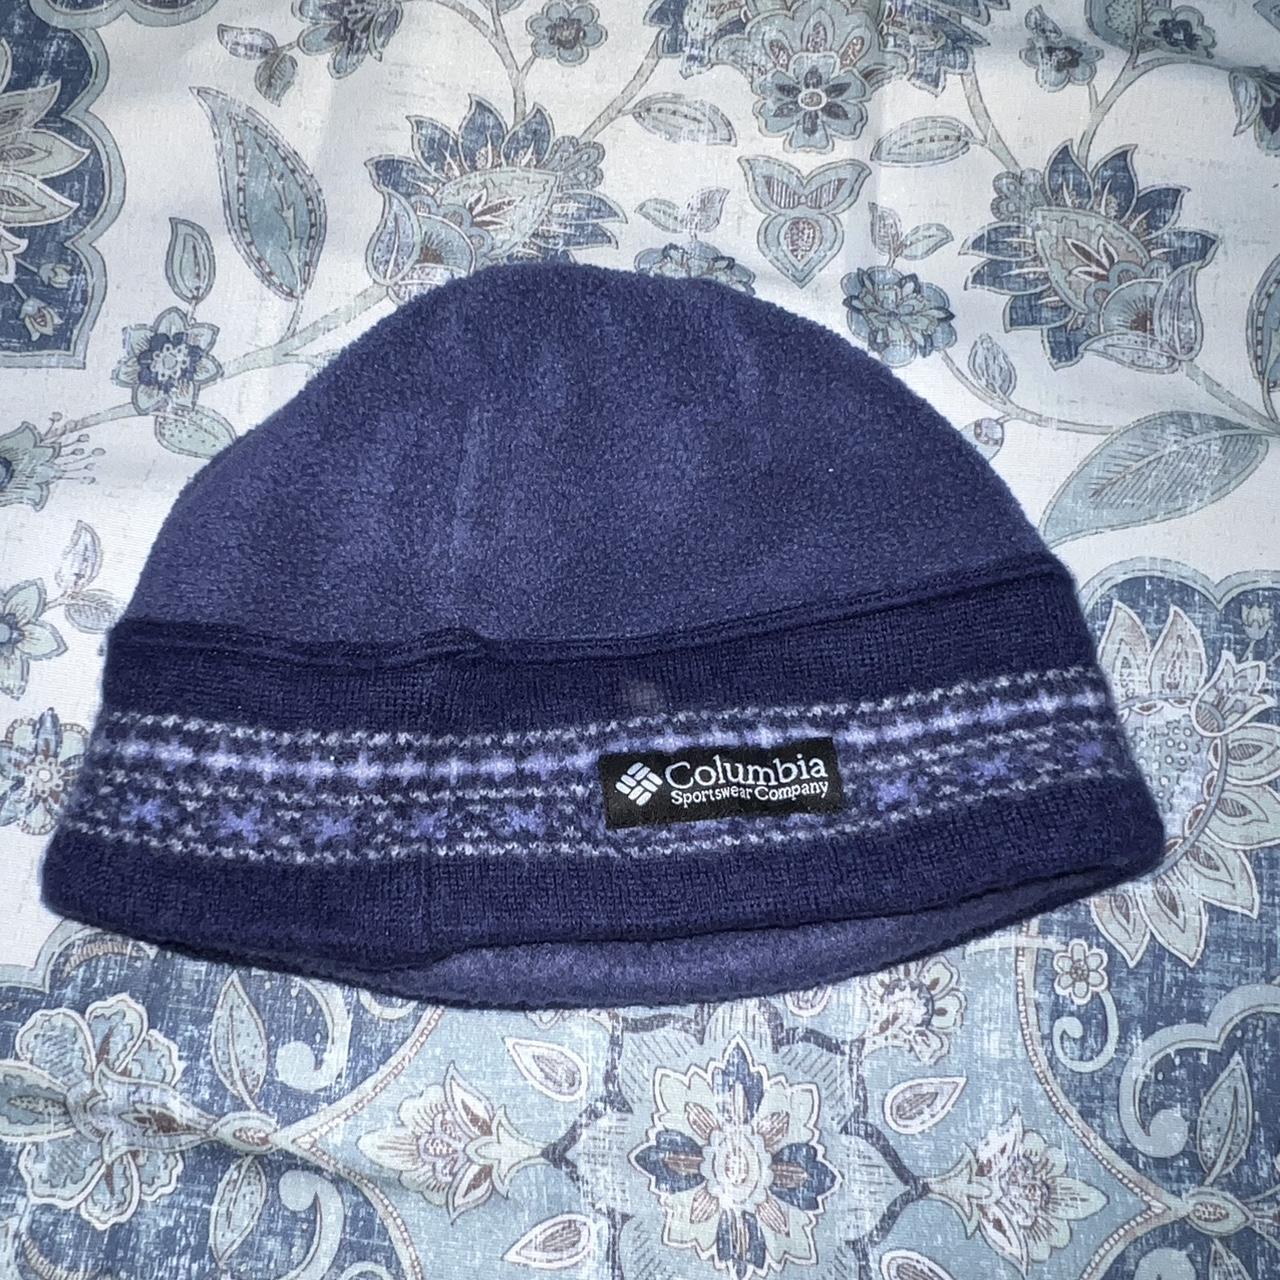 Columbia beanie , Shipping $4.40 I pay, #shoes...